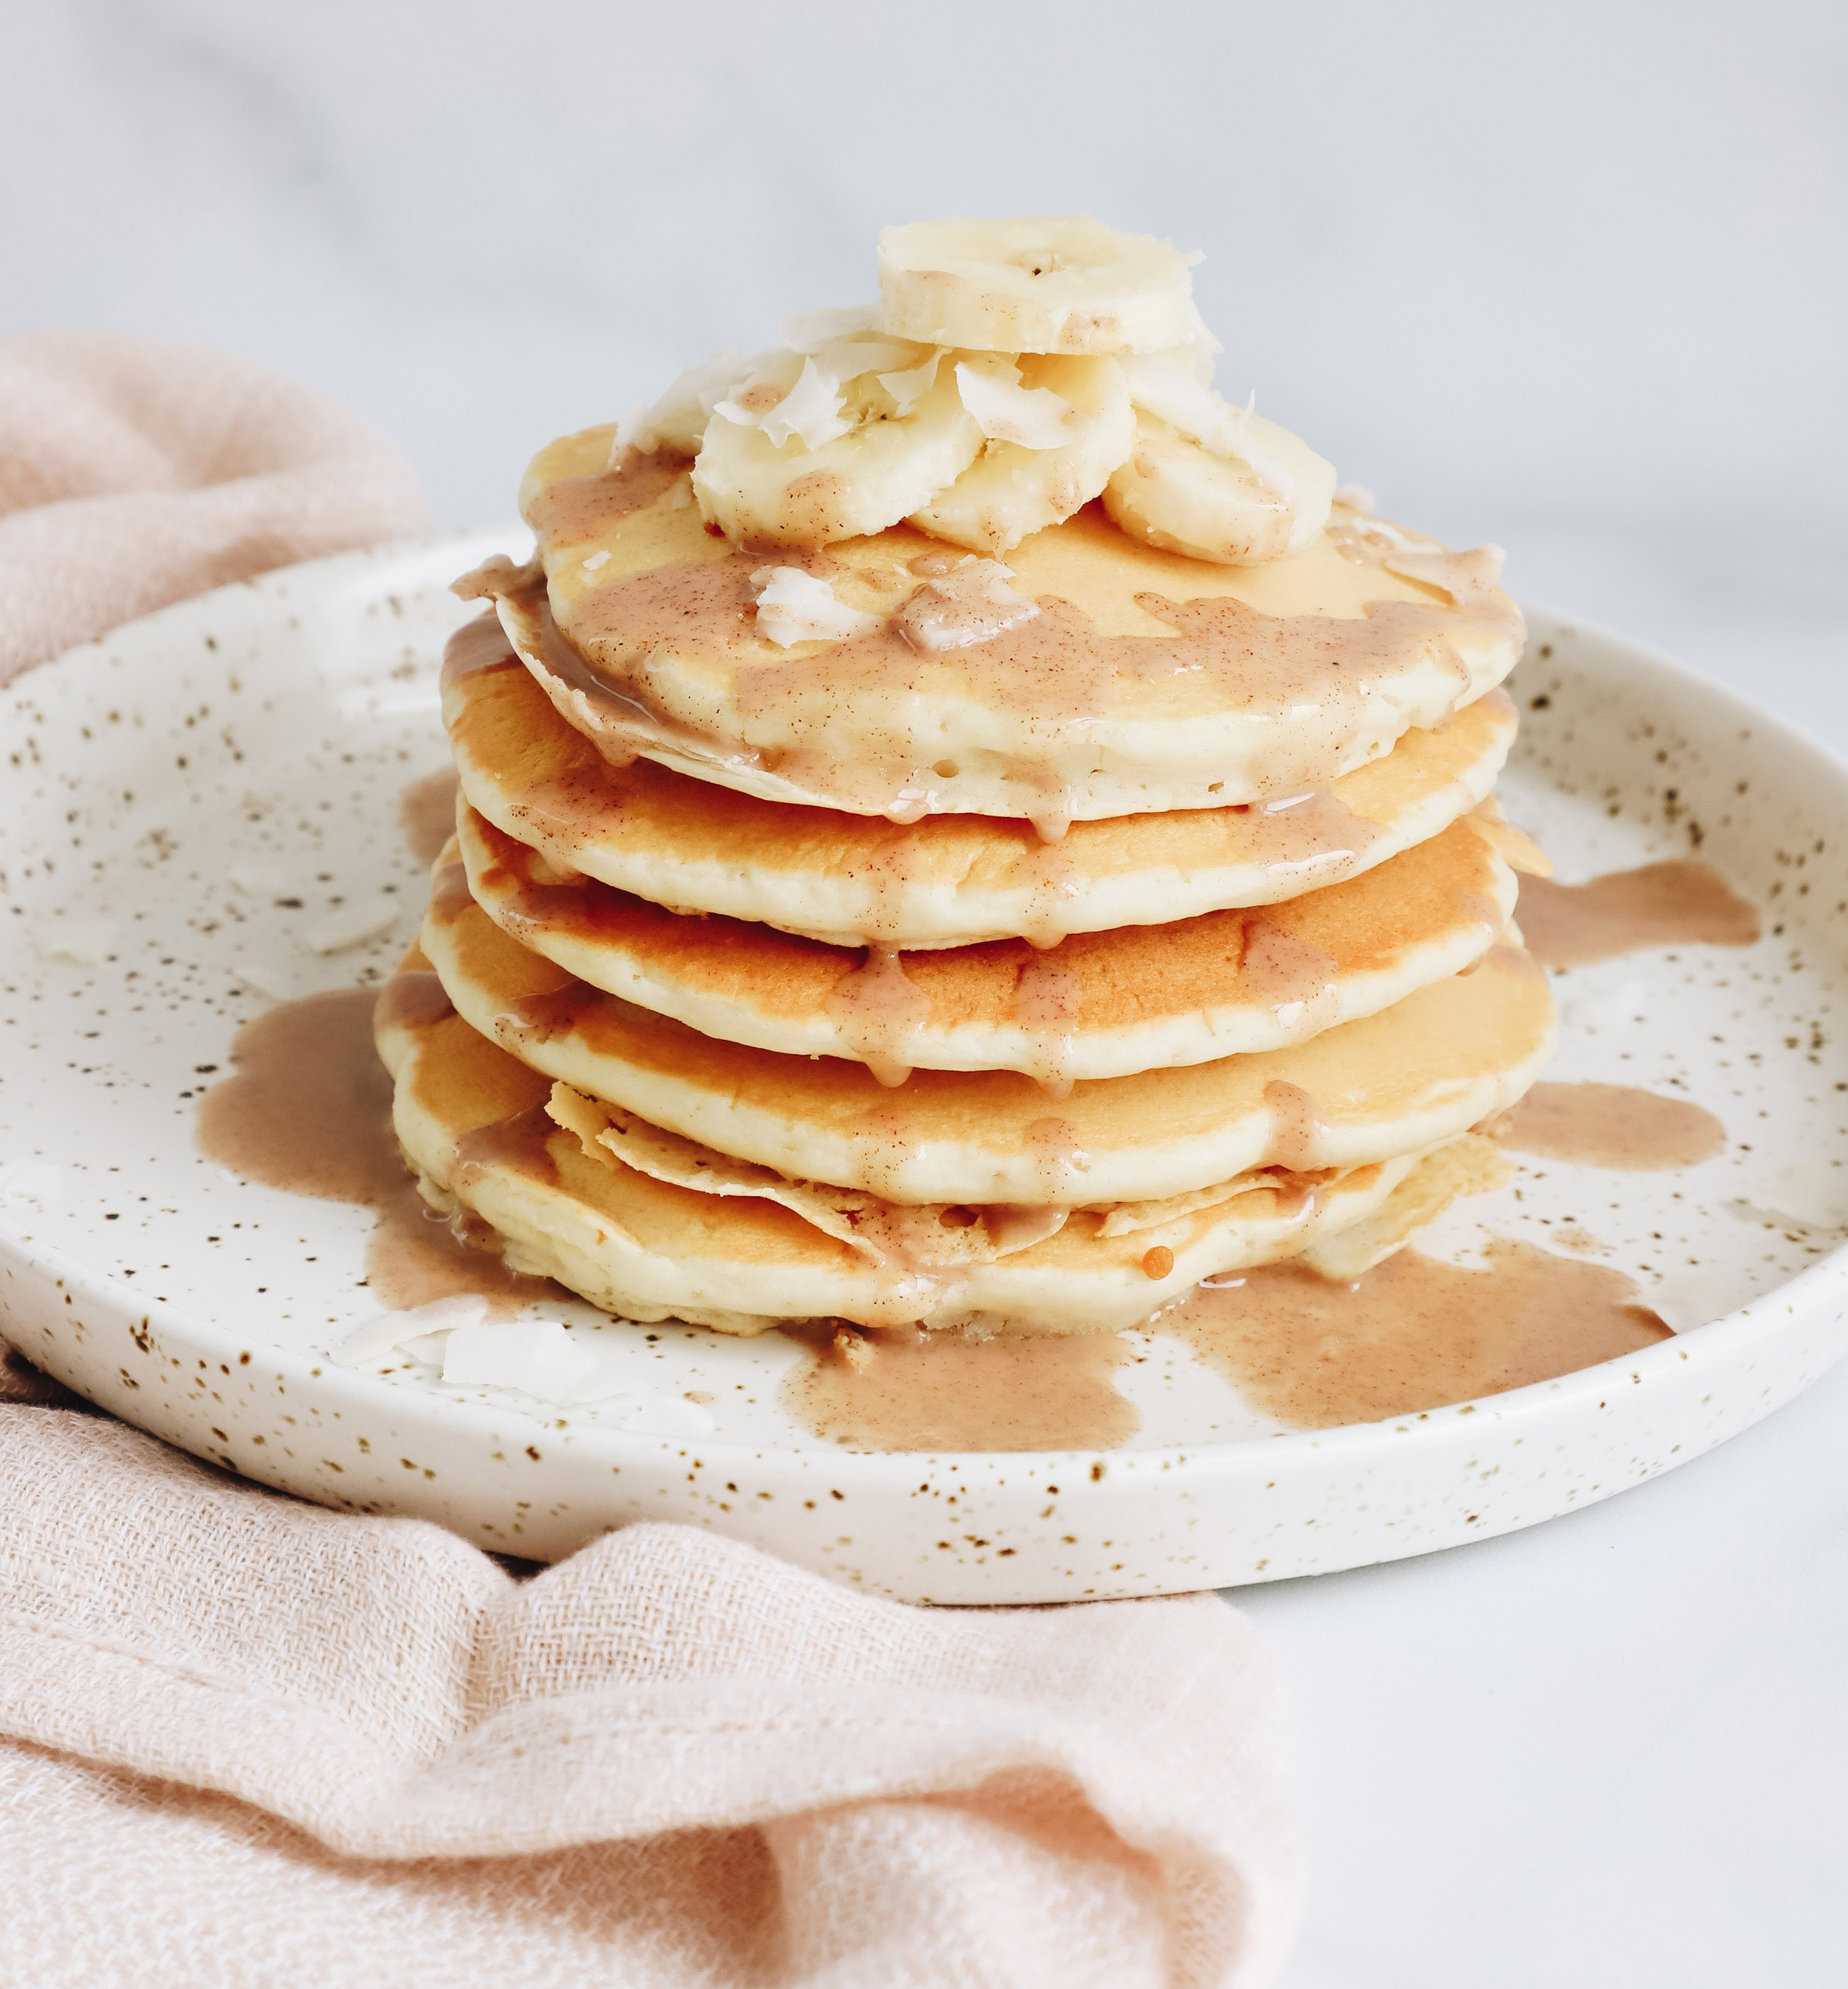 a stack of pancakes on a plate with pieces of banana and sauce on top